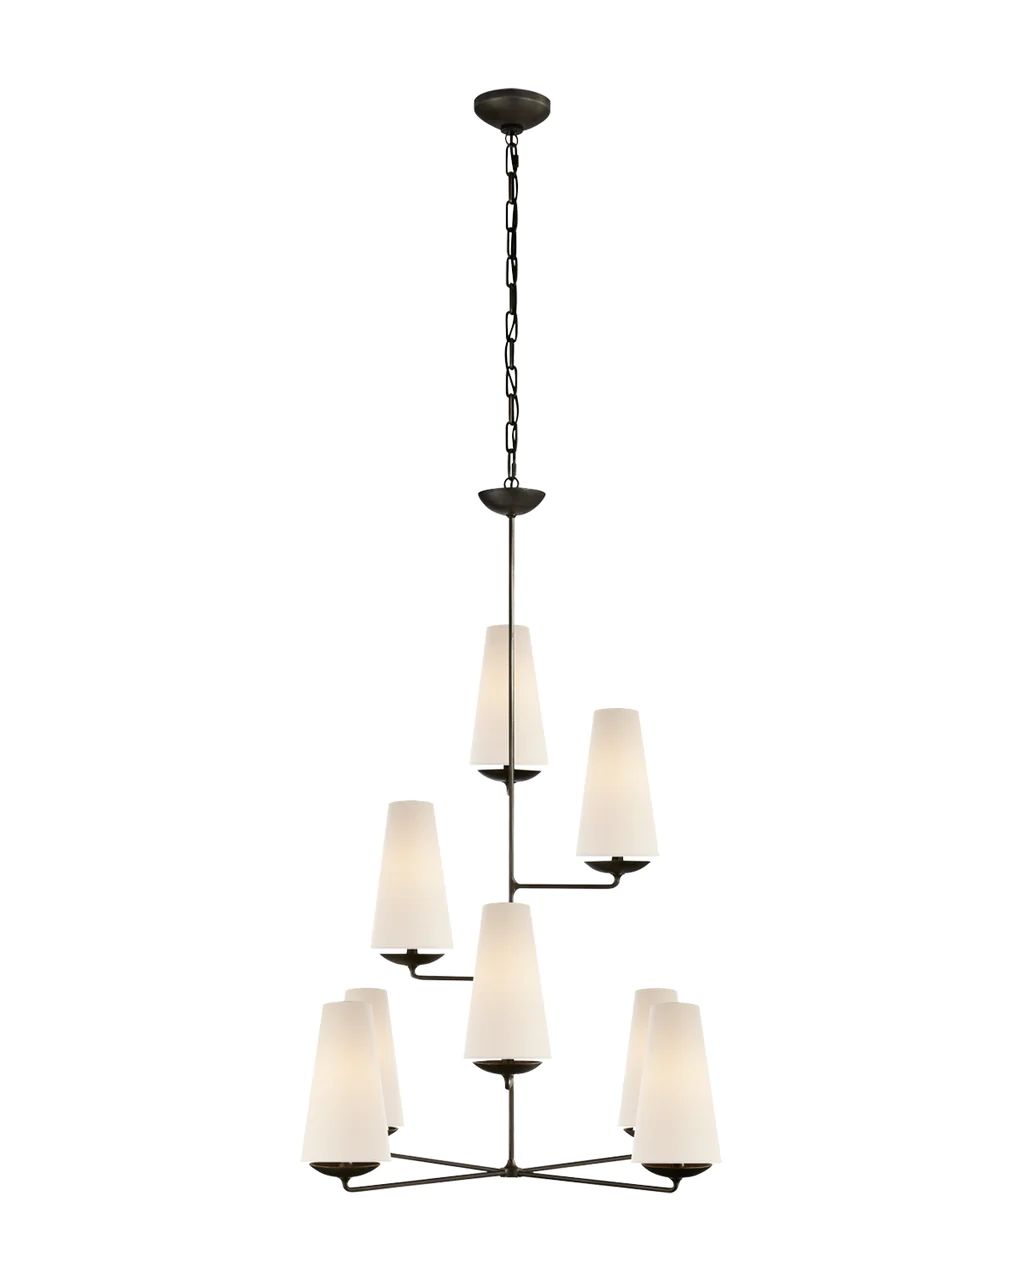 Fontaine Vertical Chandelier | McGee & Co.